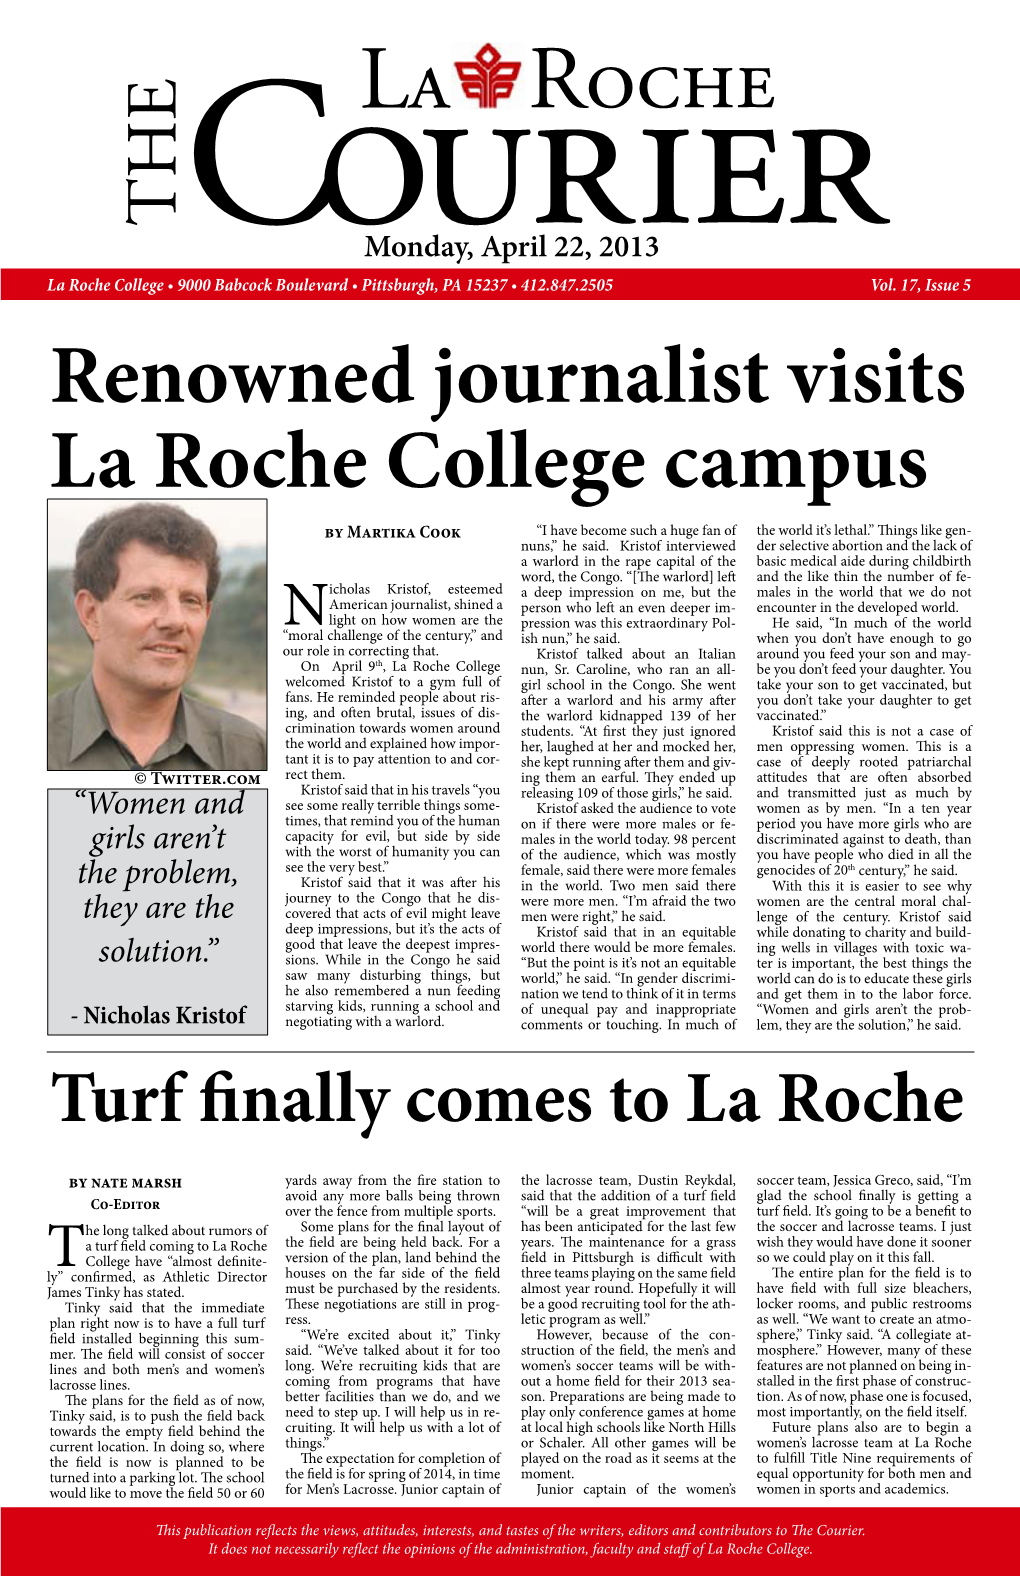 Renowned Journalist Visits La Roche College Campus by Martika Cook “I Have Become Such a Huge Fan of the World It’S Lethal.” Things Like Gen- Nuns,” He Said